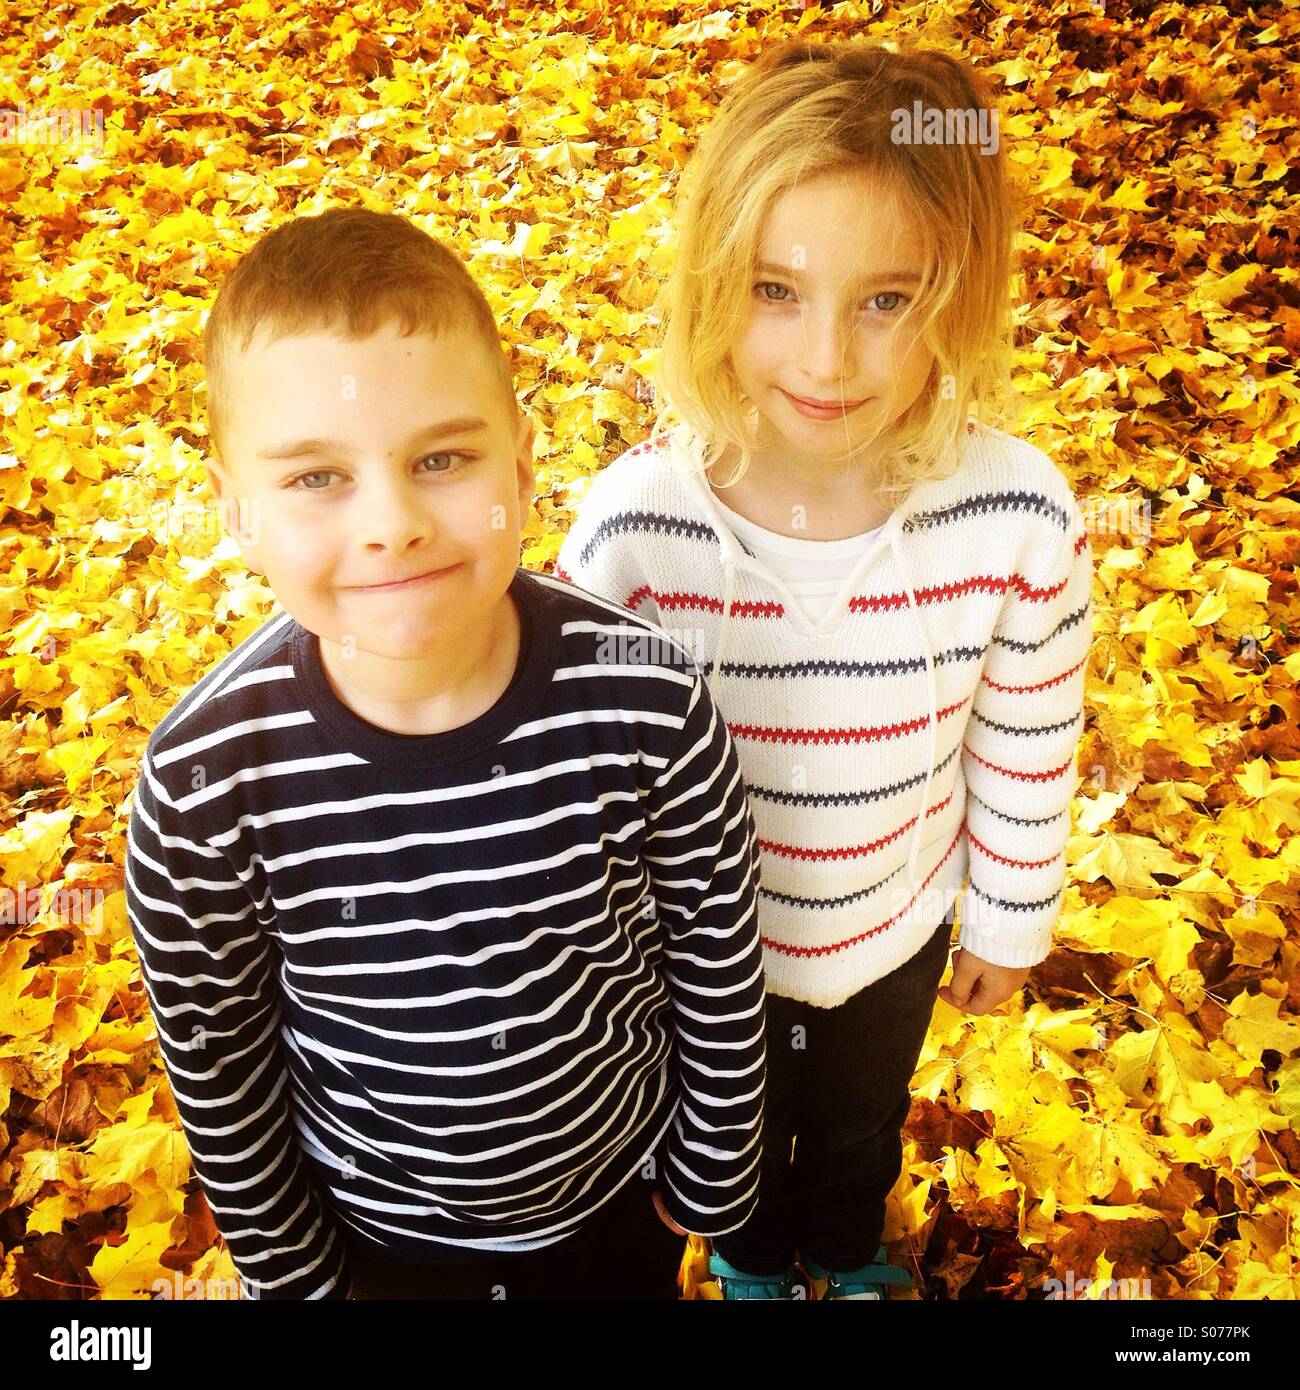 A cute brother and sister in a field of golden yellow autumn fall leaves Stock Photo